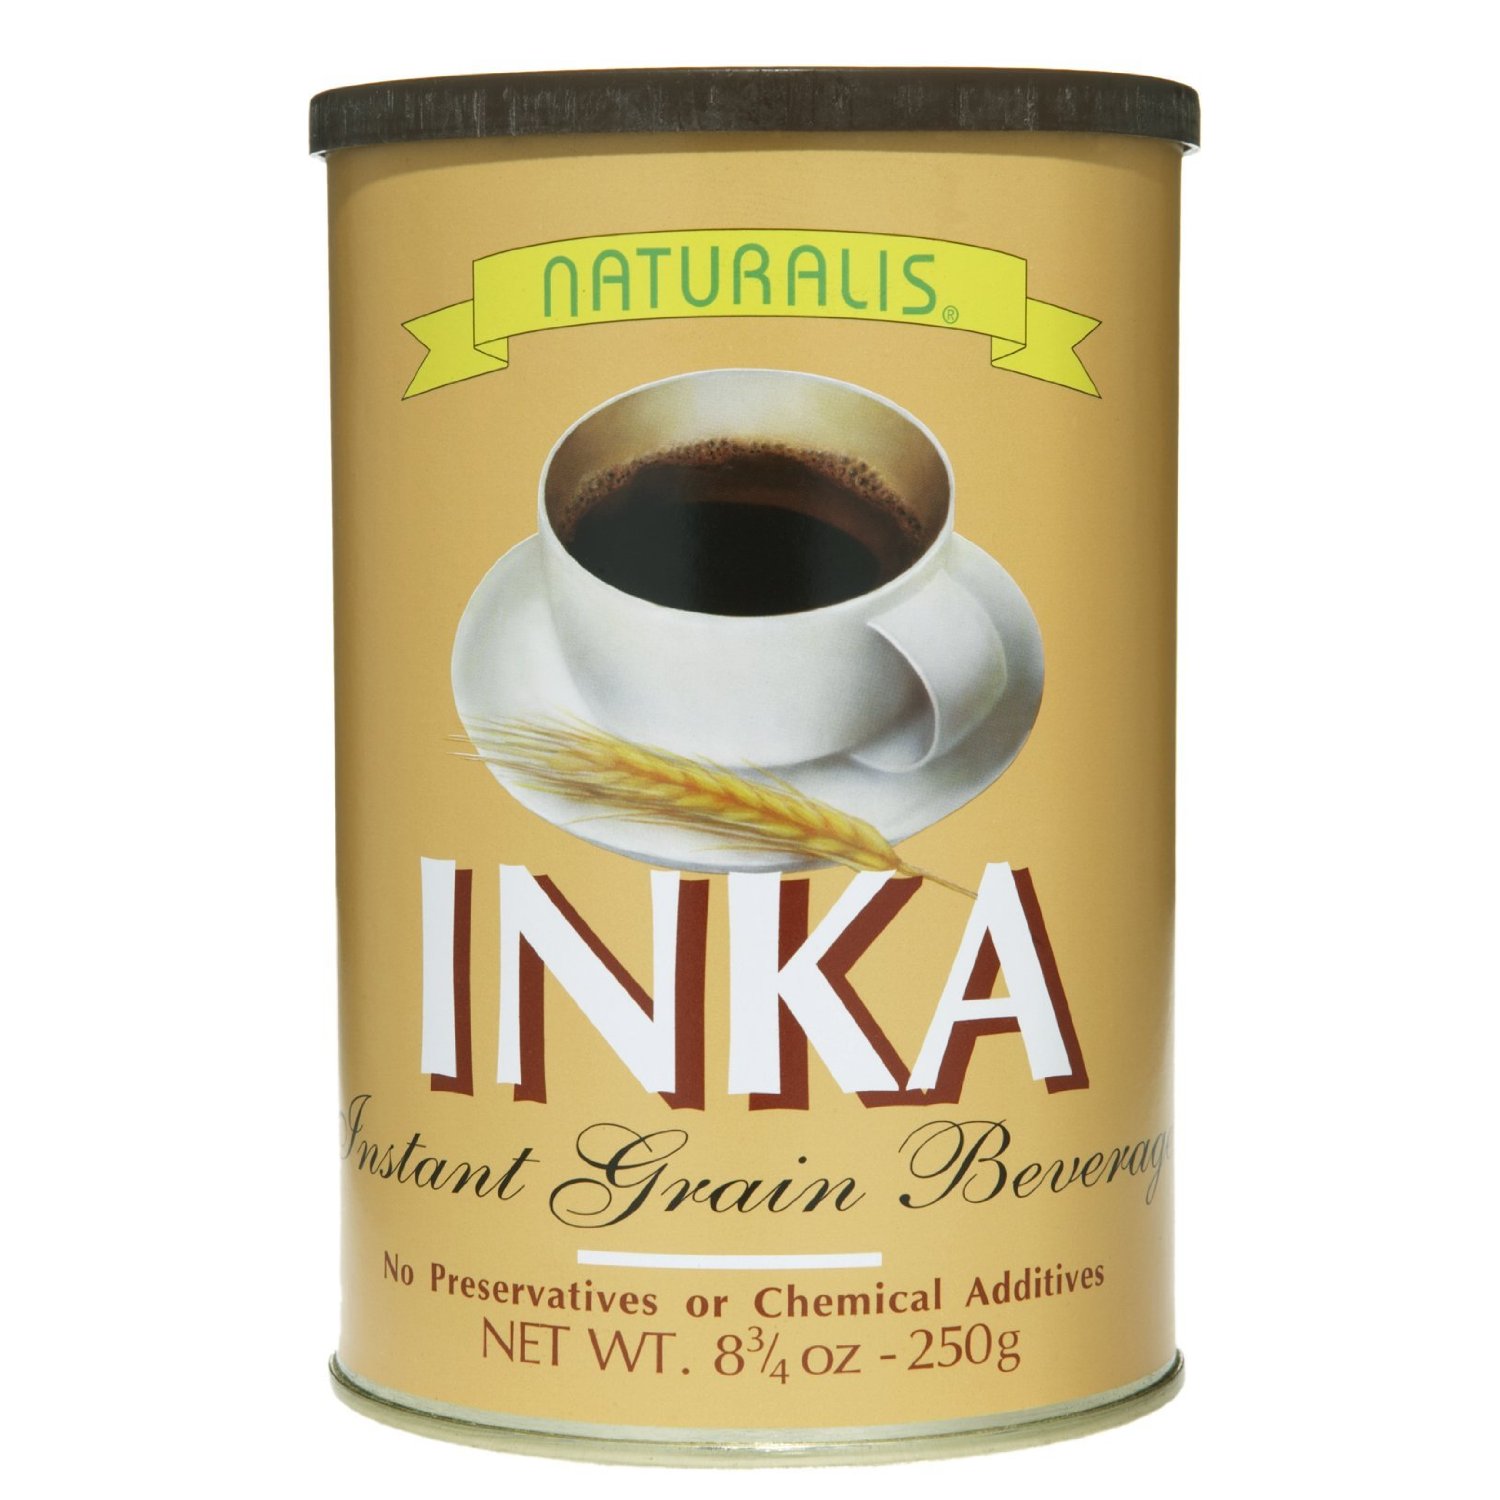 a can of Inka